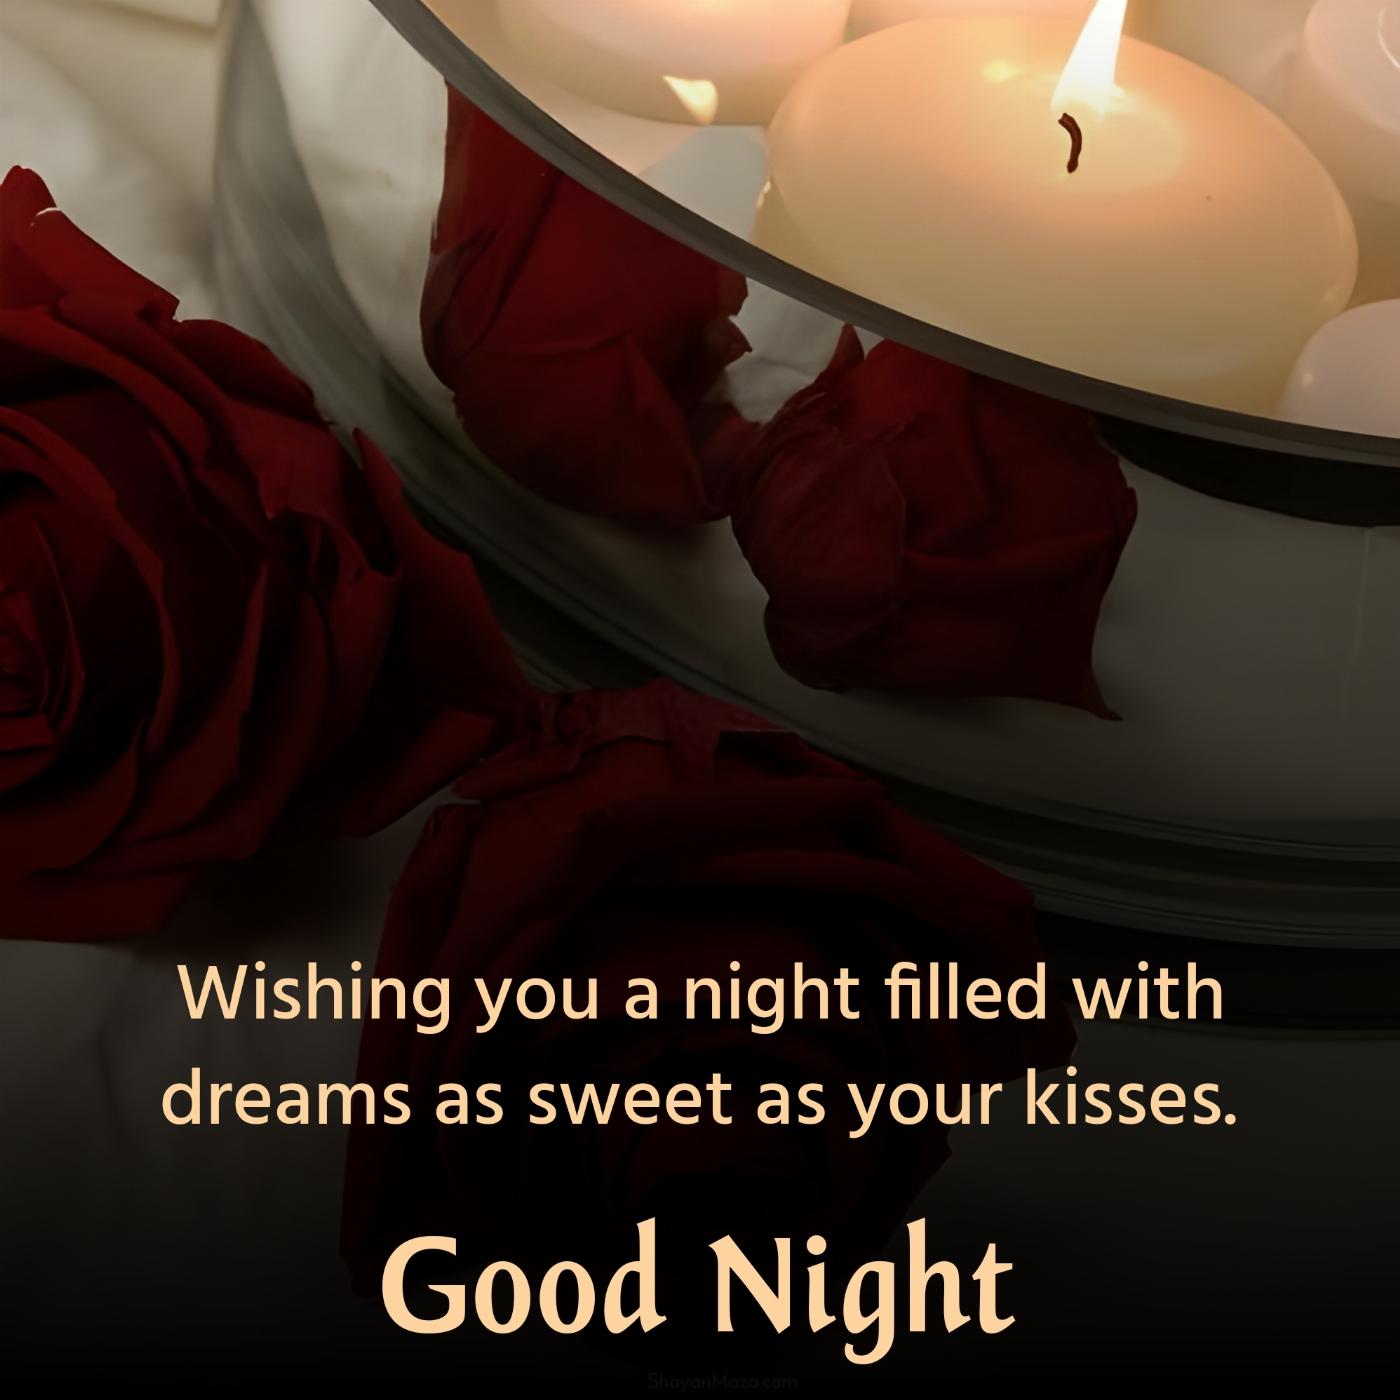 Wishing you a night filled with dreams as sweet as your kisses